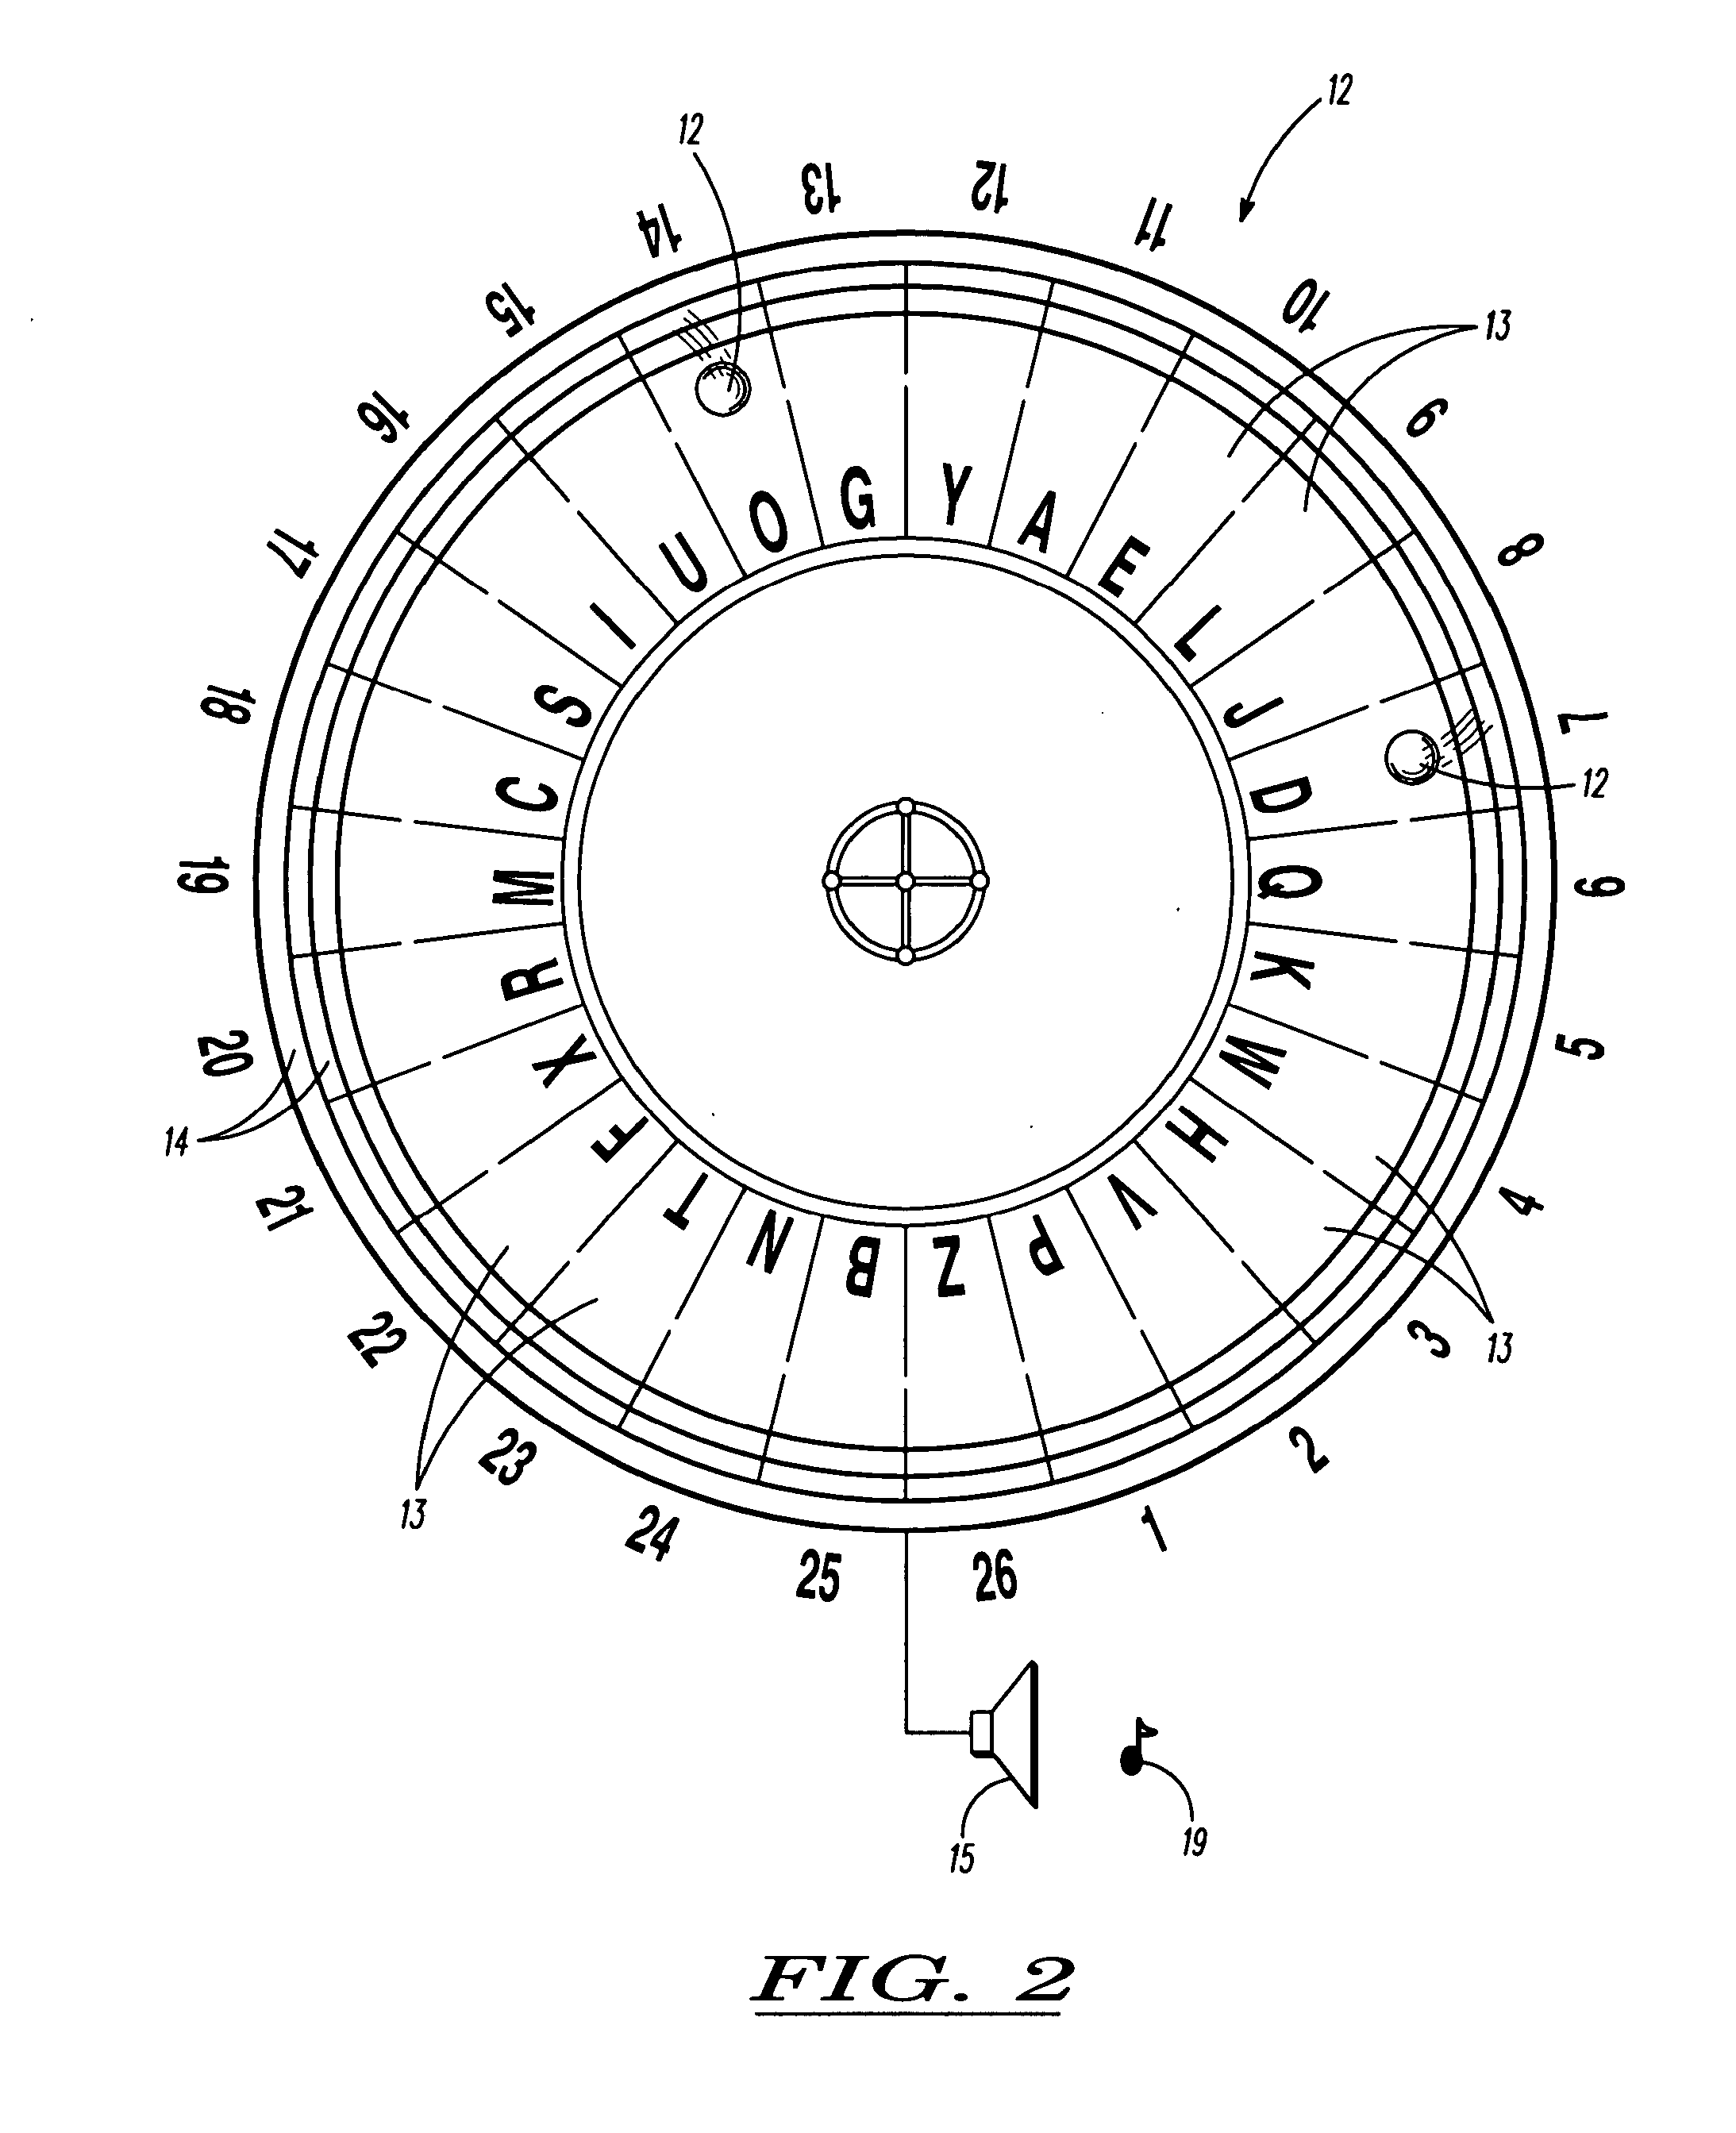 Syllabic roulette game with solmization, and method